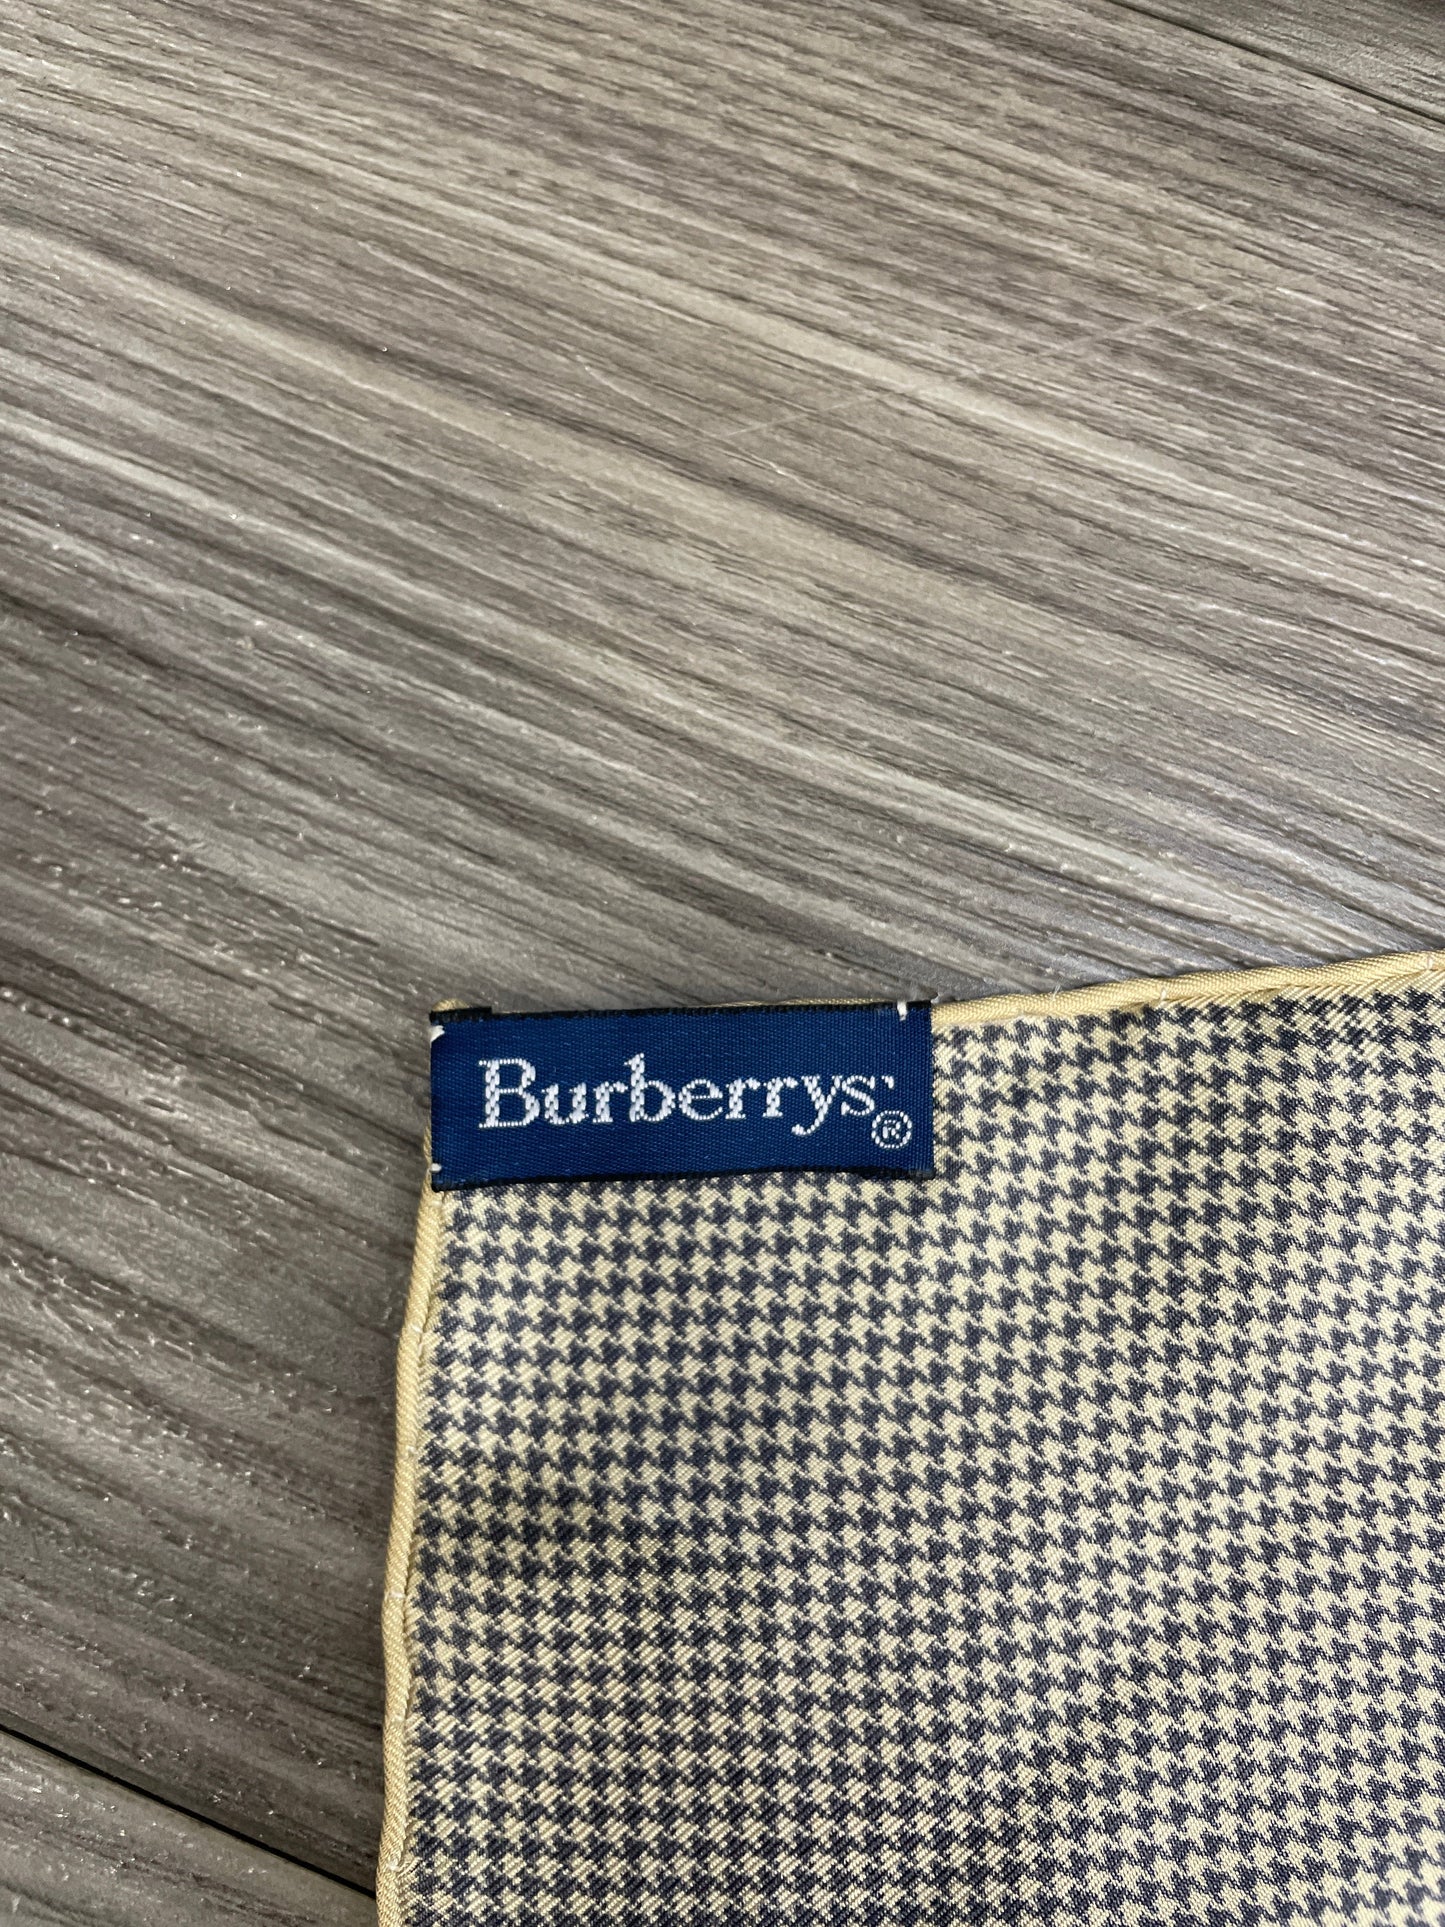 Scarf Square By Burberry